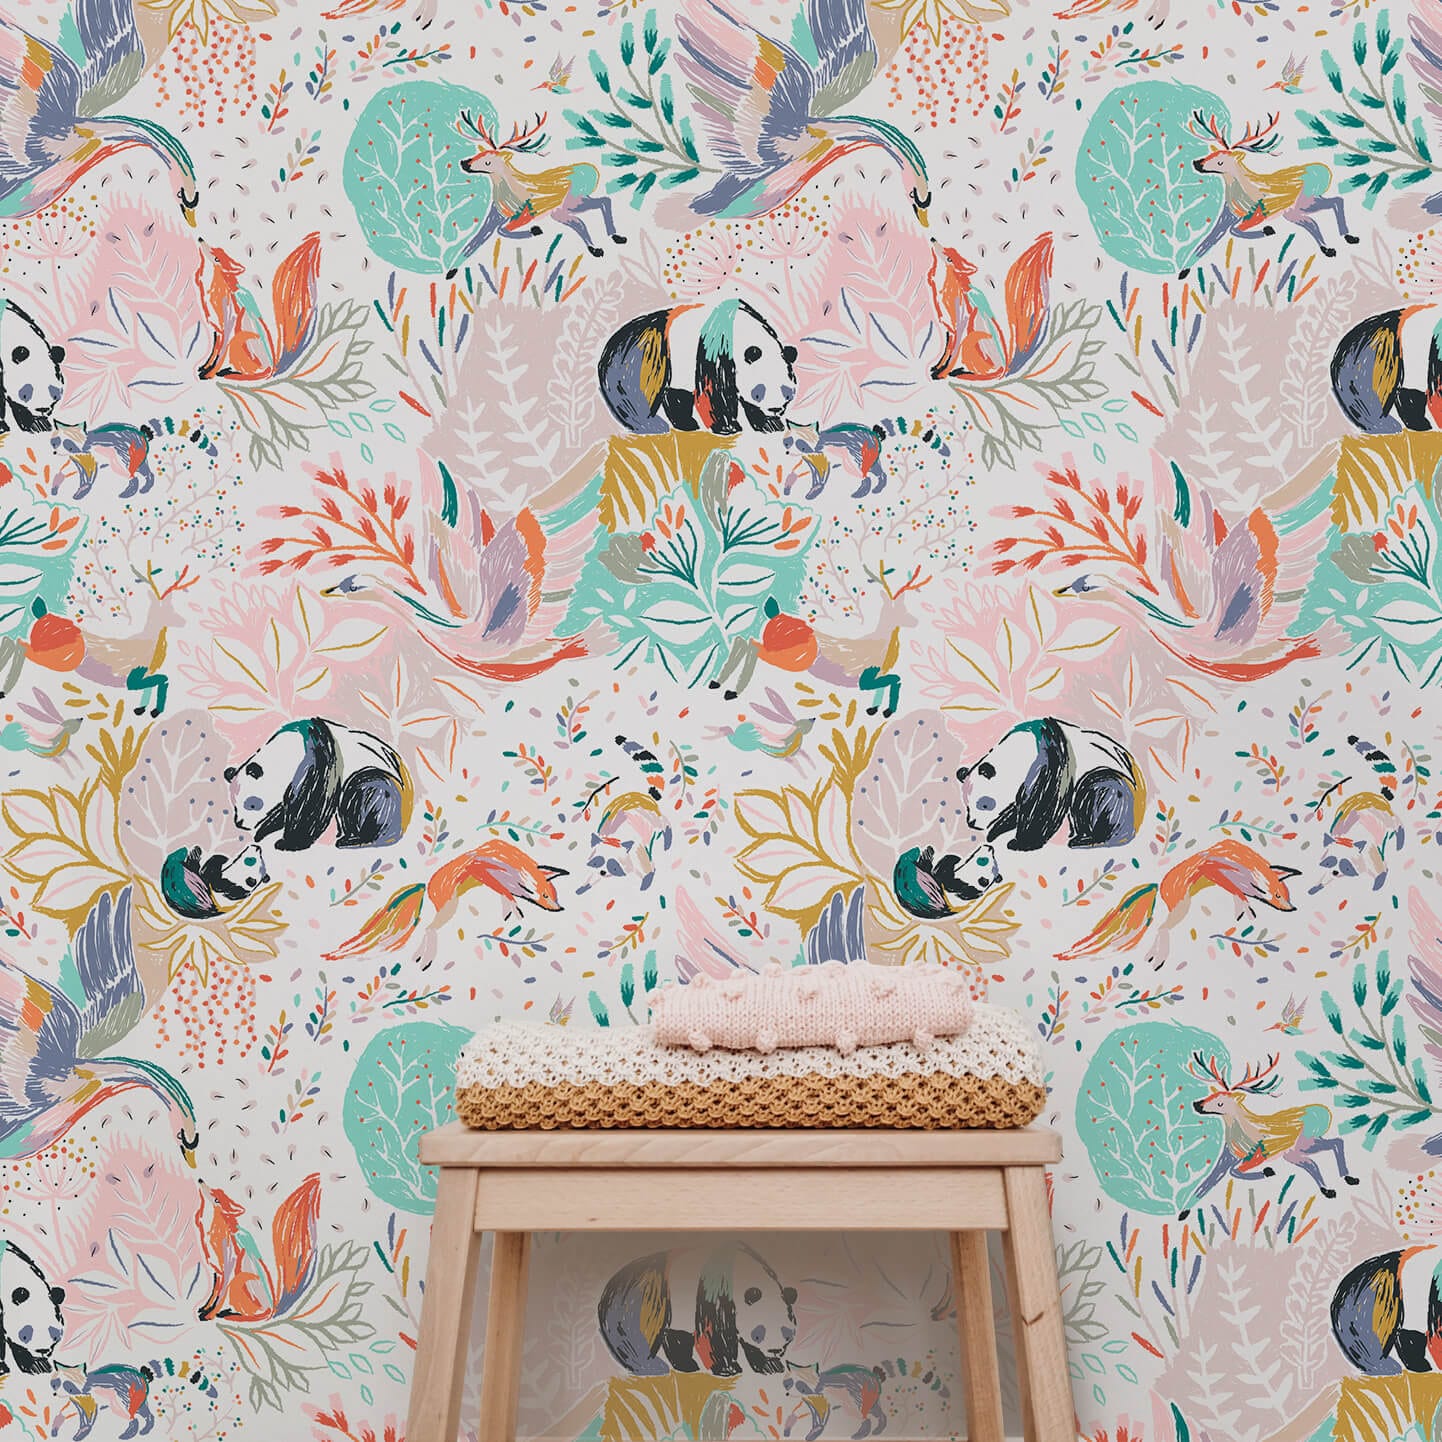 Wallpaper of a mummy panda and baby panda, a leaping deer, a fox, swan, racoon, rabbit with floral artwork surrounding.